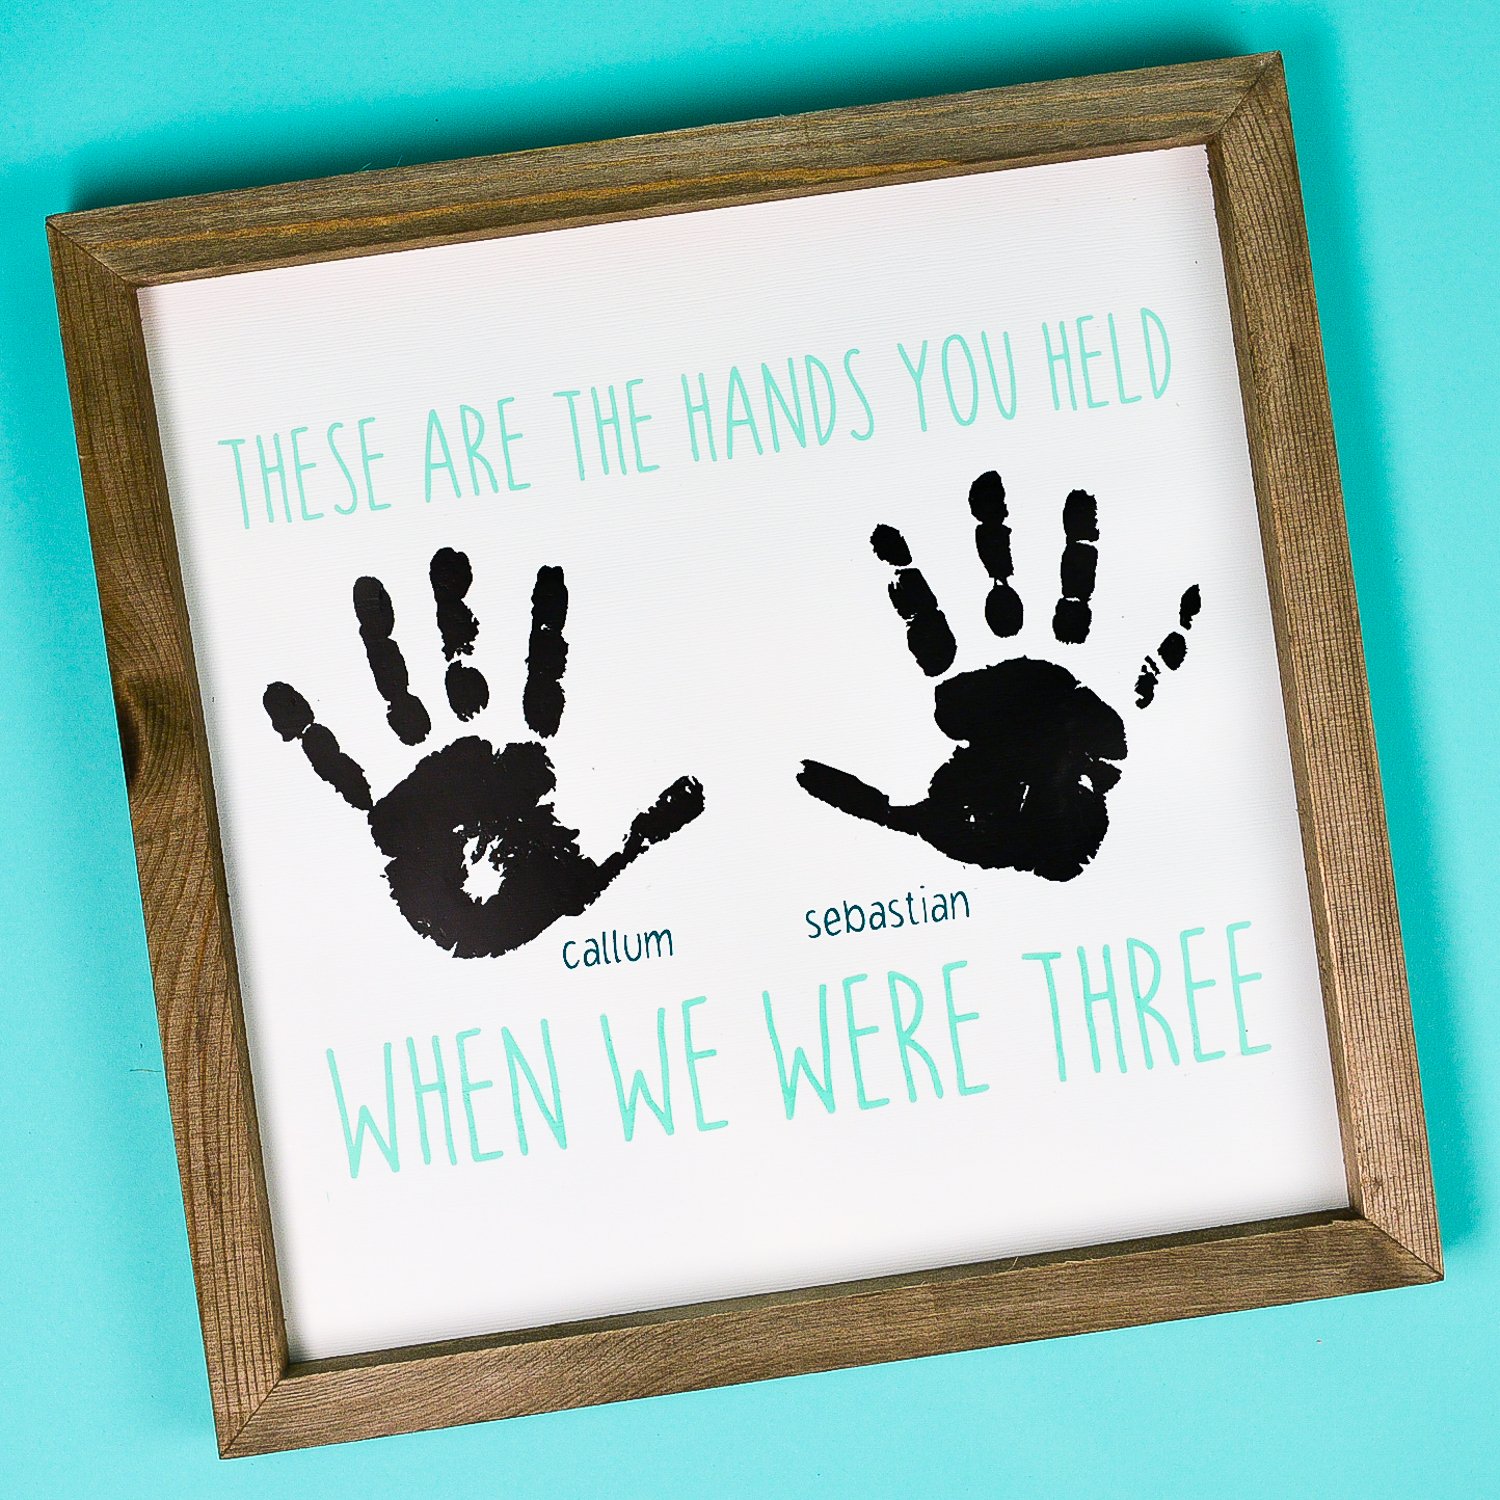 A close up of a wood frame holding a sign that contains two handprints with boy\'s names next to each and says, \"These are the Hand You Held When We Were Three\"